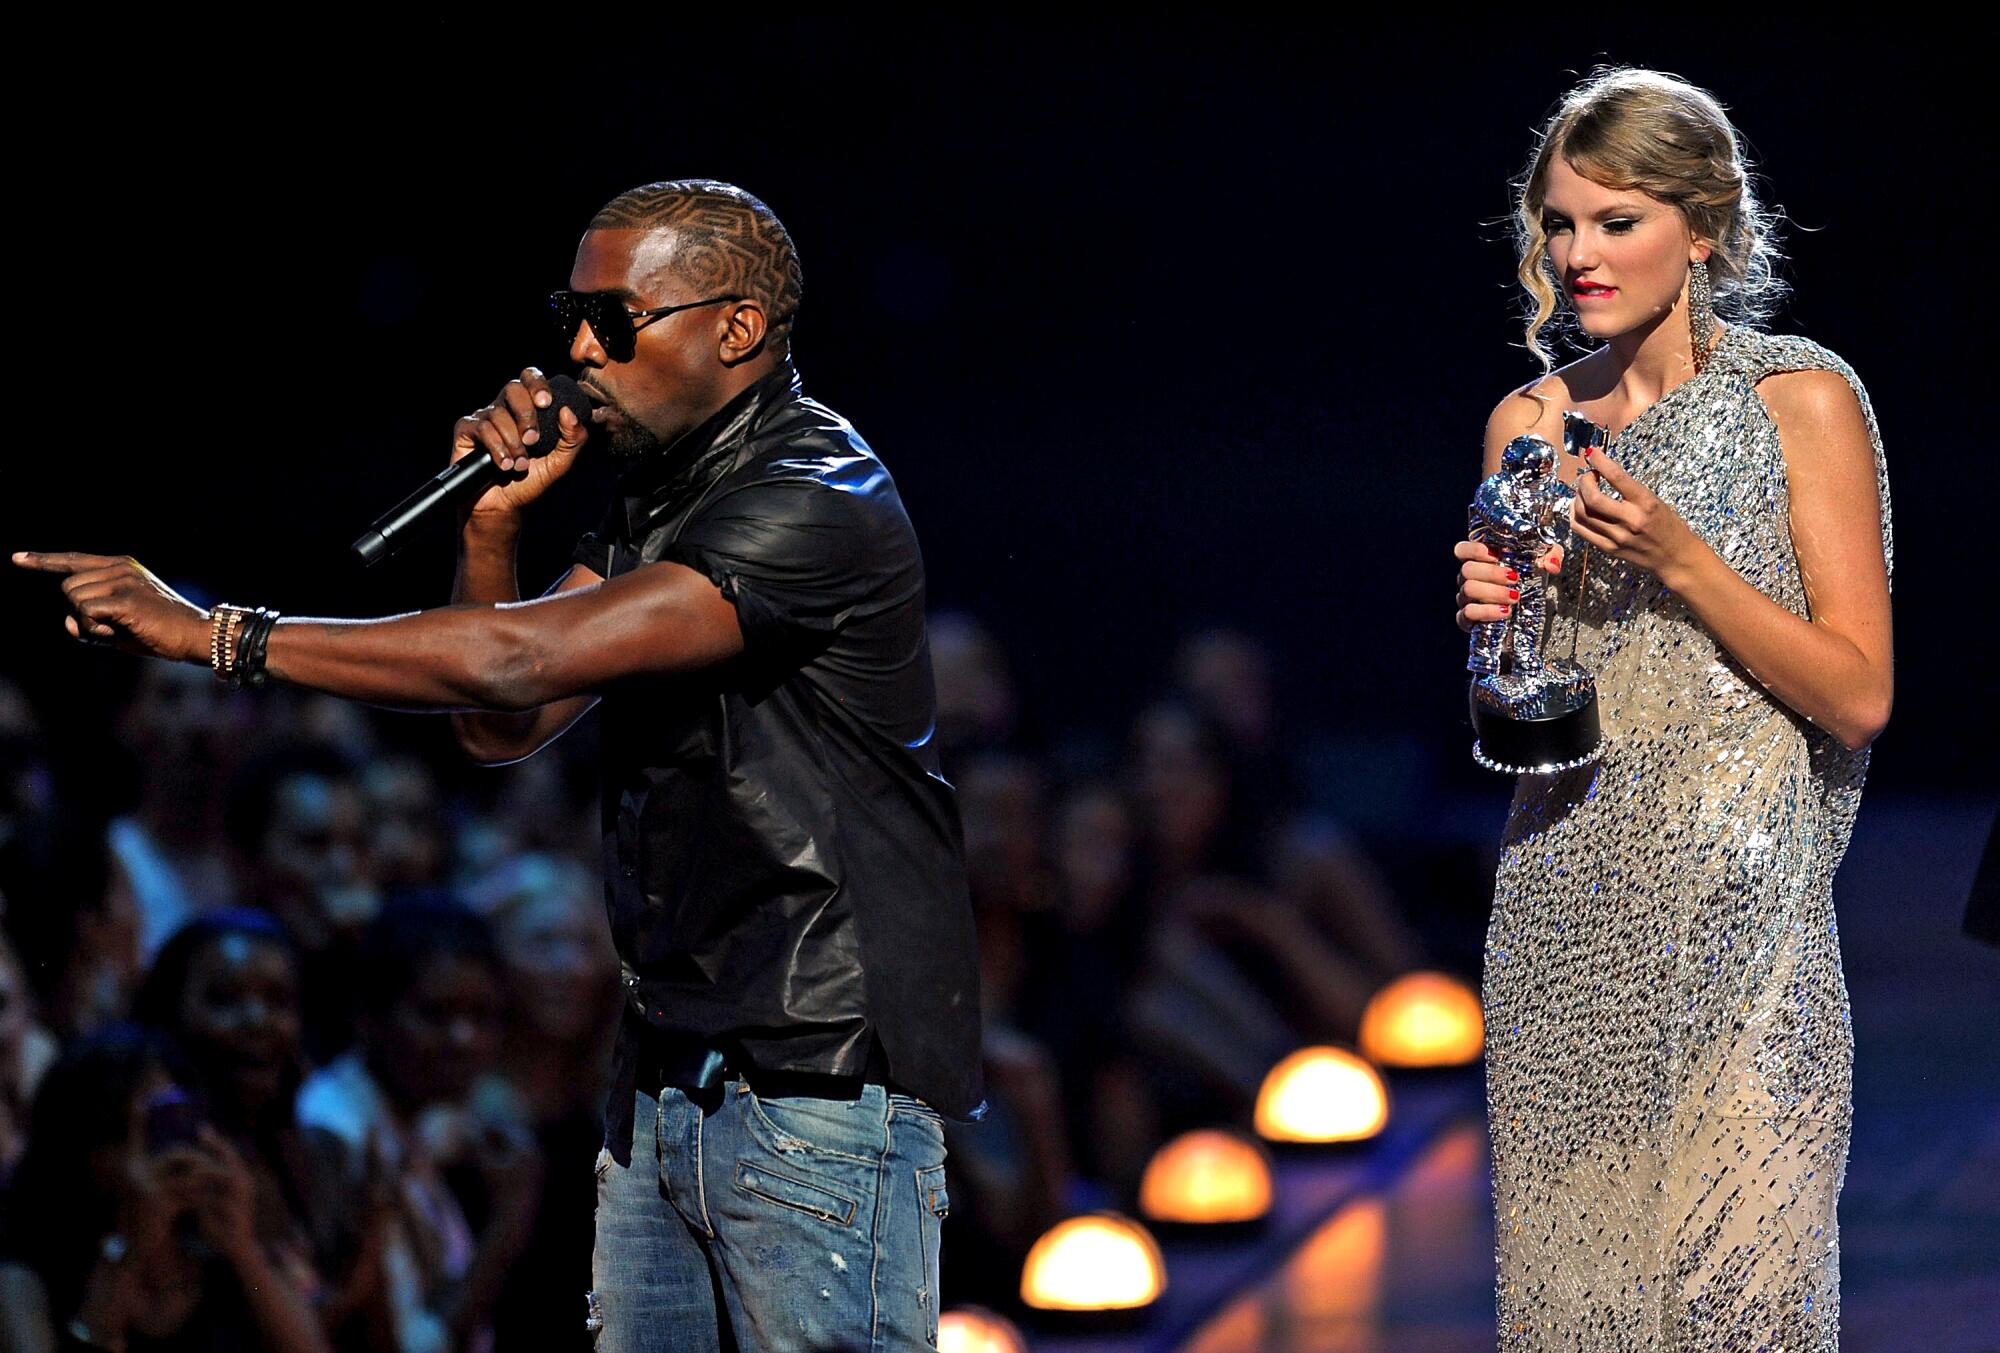 A male rap star interrupts a female pop star onstage at an awards show. 